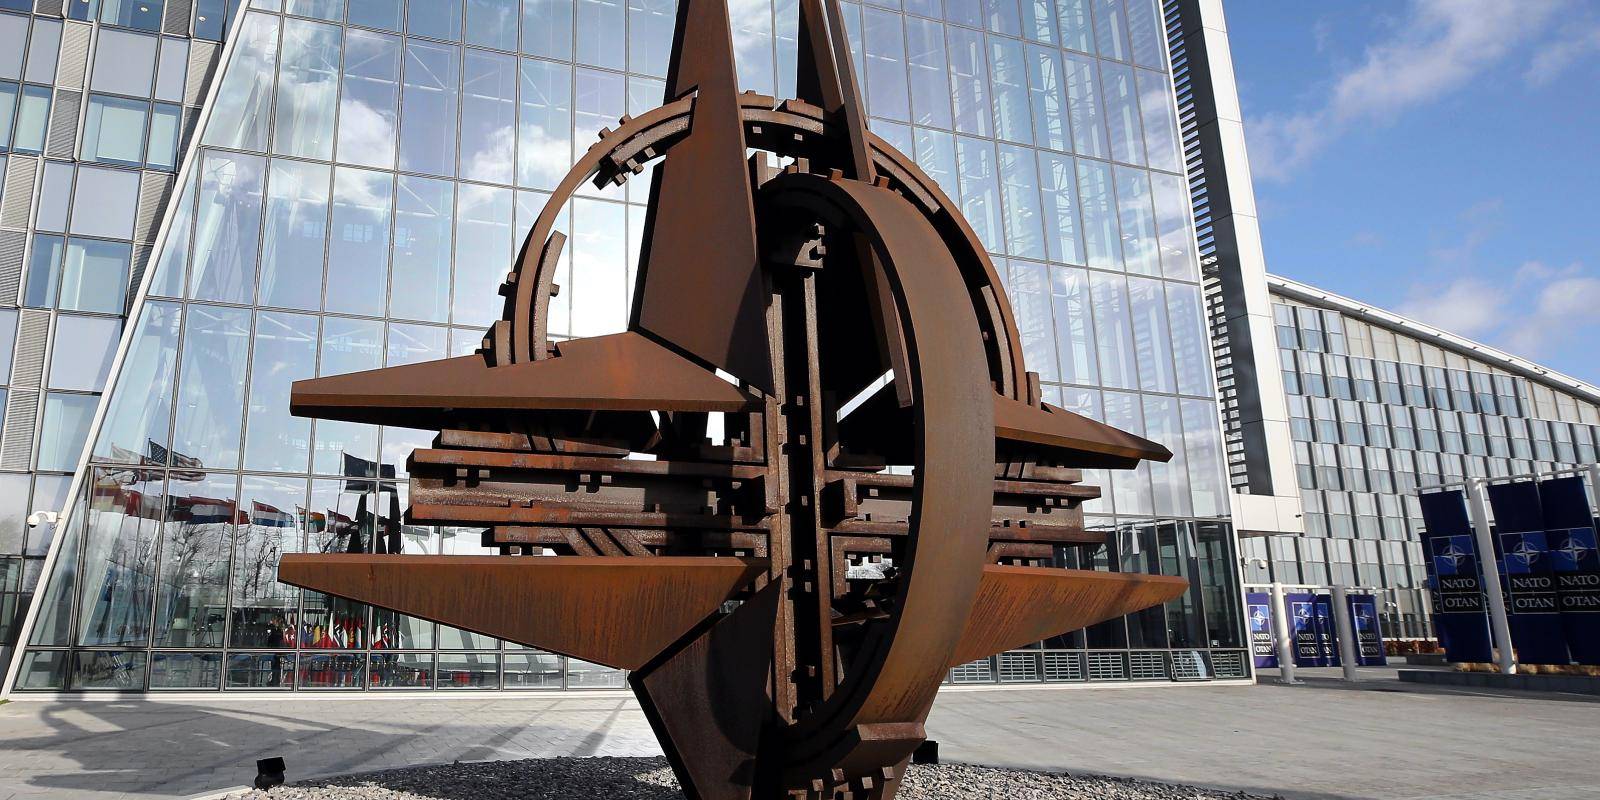 The NATO star sculpture reflected in windows outside NATO headquarters in Brussels, Belgium